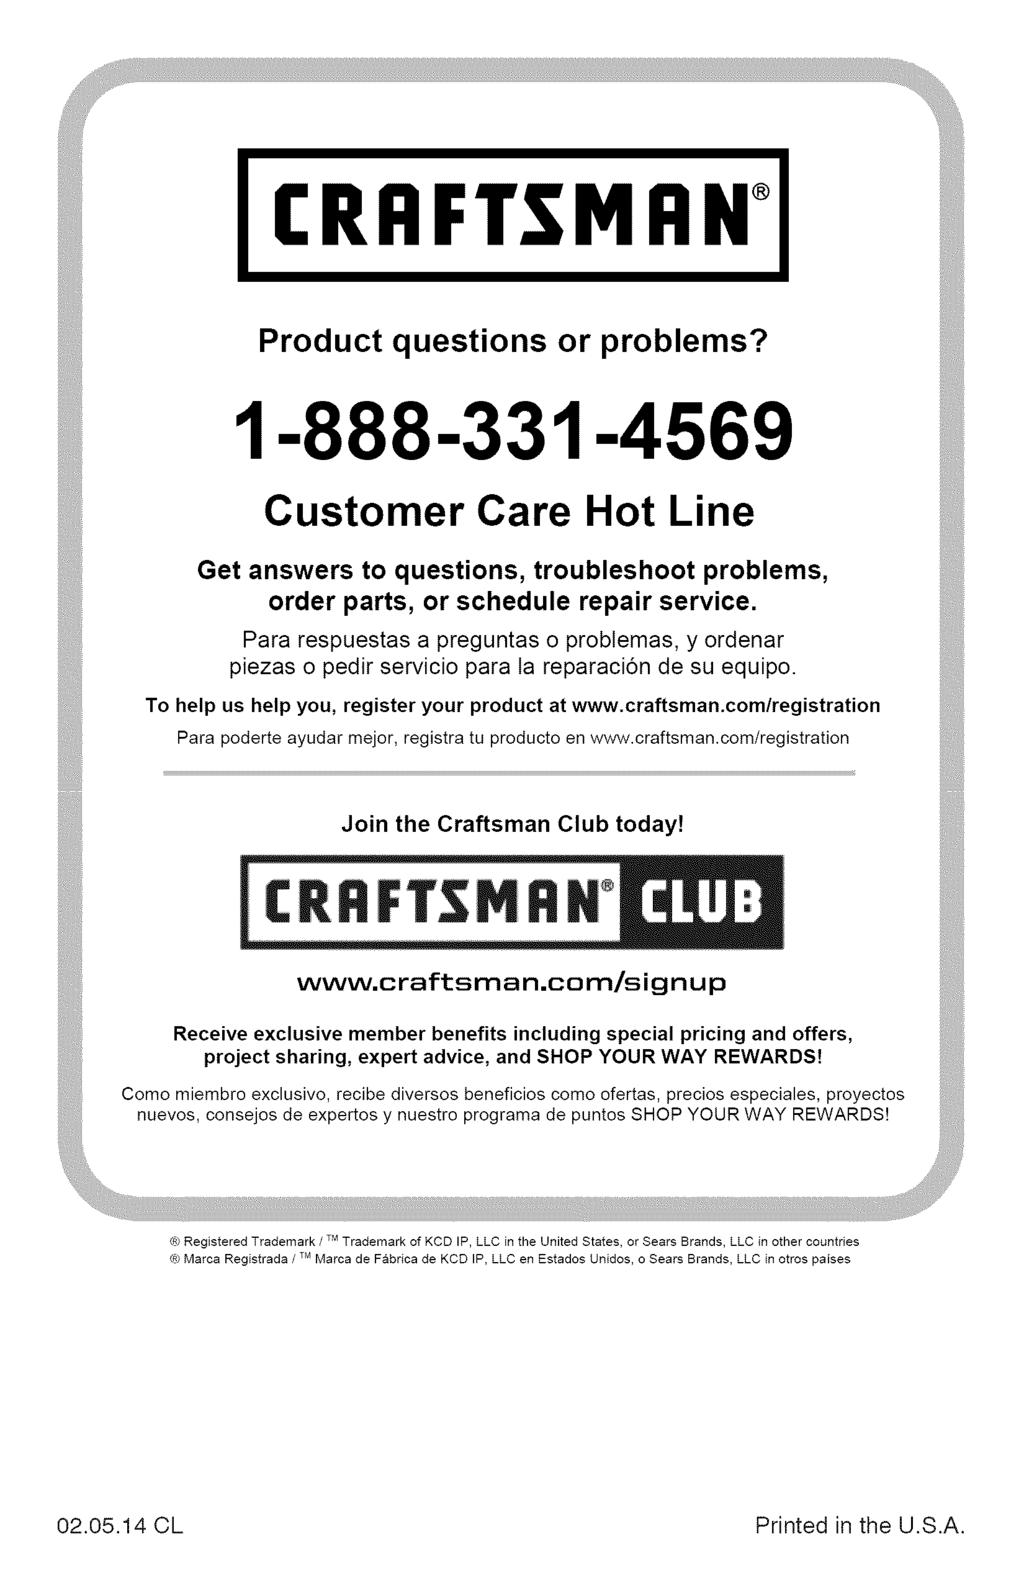 CRAFrSMAN Product questions or problems? 1-888-331-4569 Customer Care Hot Line Get answers to questions, troubleshoot problems, order parts, or schedule repair service.